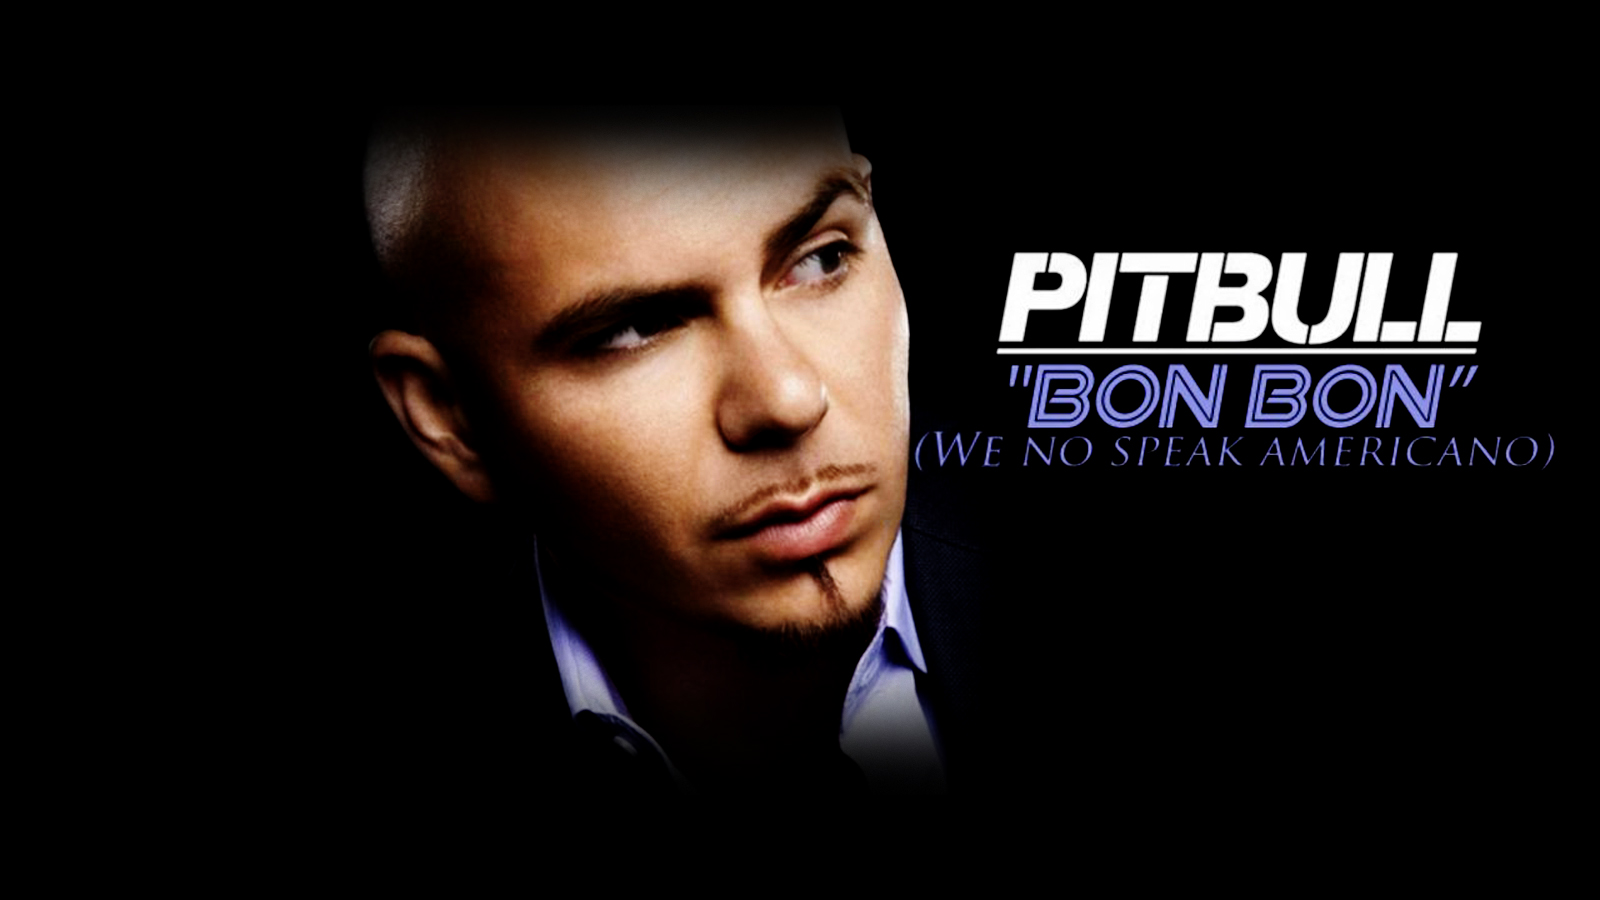 Rapper Pitbull HD Wallpapers Download Free Wallpapers in HD for your